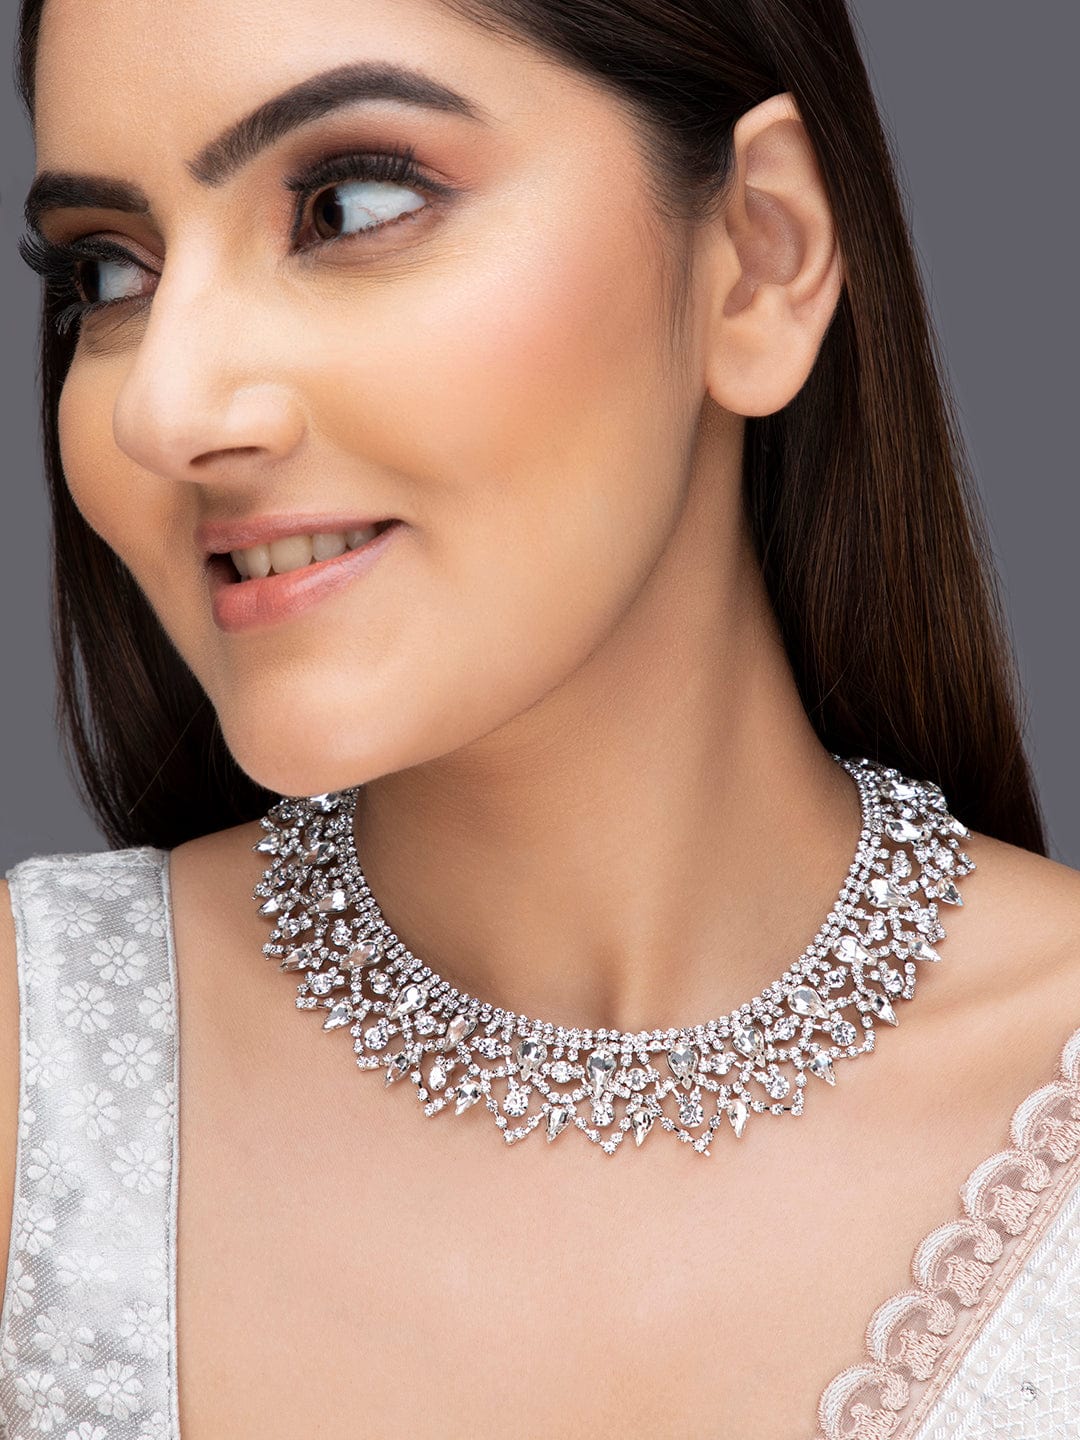 Tokyo Talkies X Rubans Silver Plated Necklace With Beautiful Design And Studded Stones. Chain & Necklaces